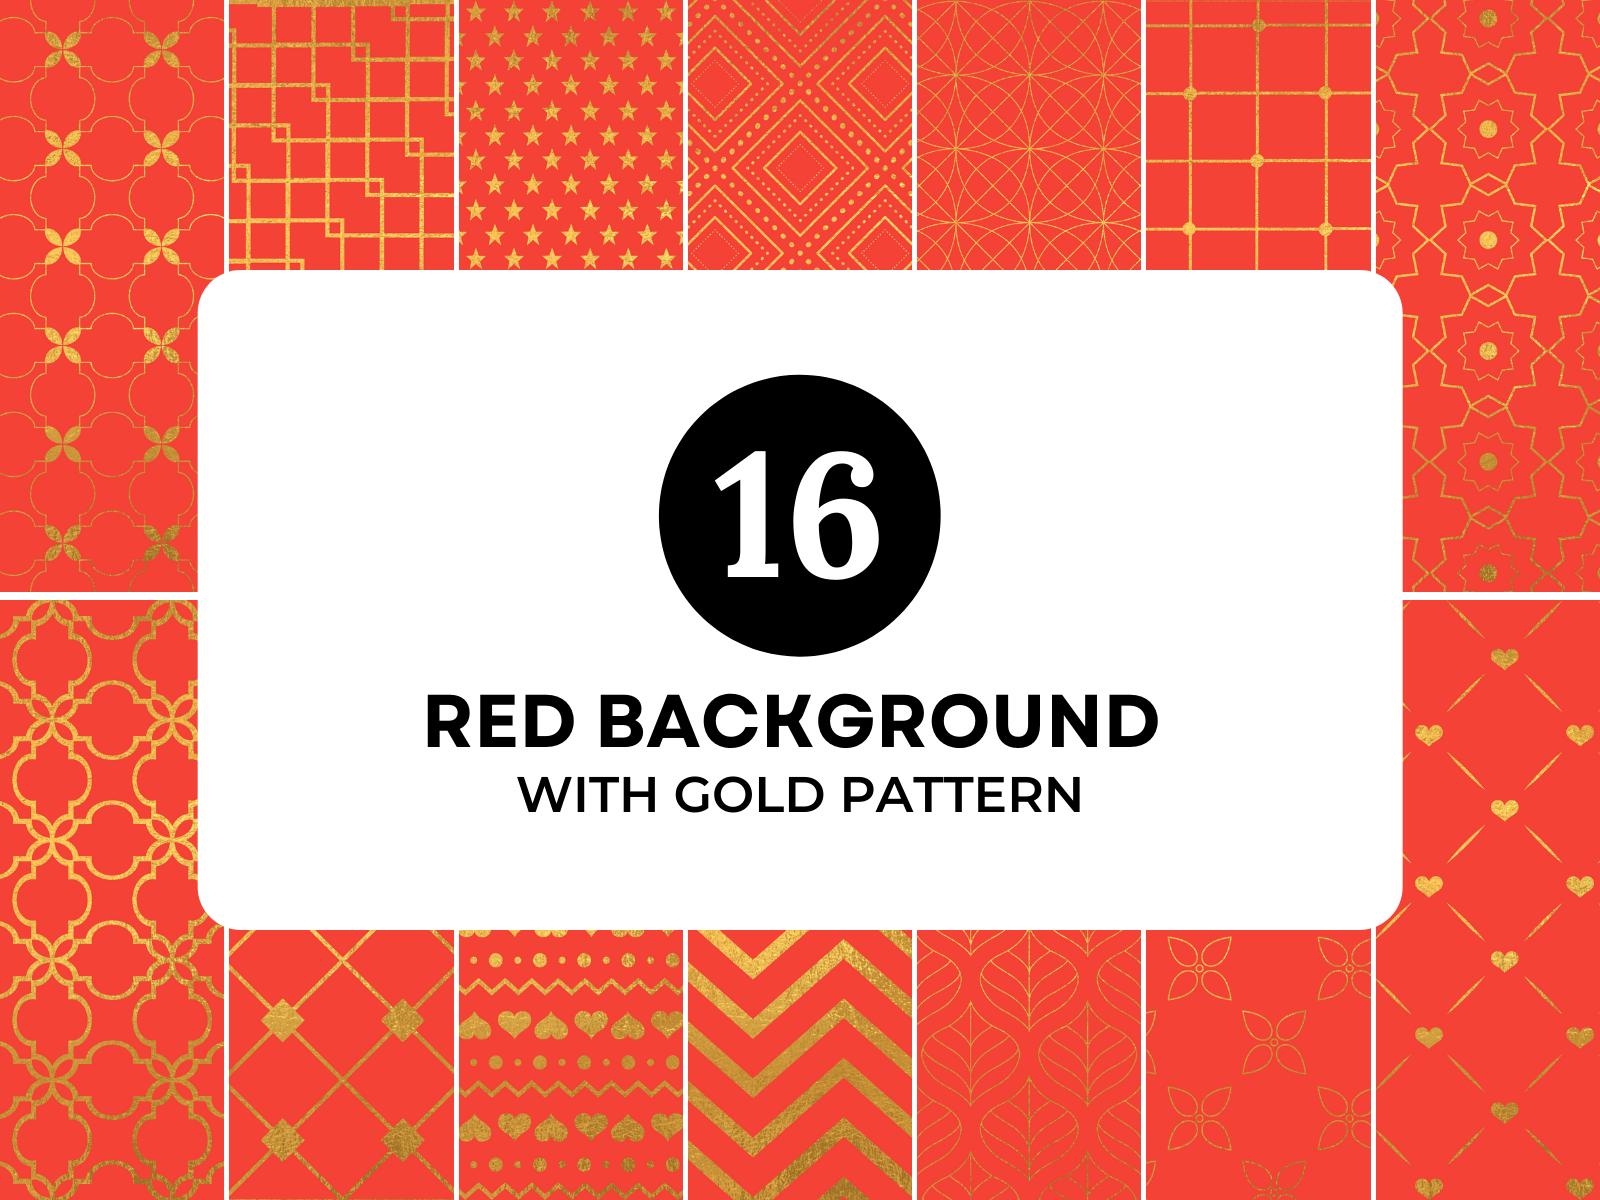 Red Background with Gold Pattern